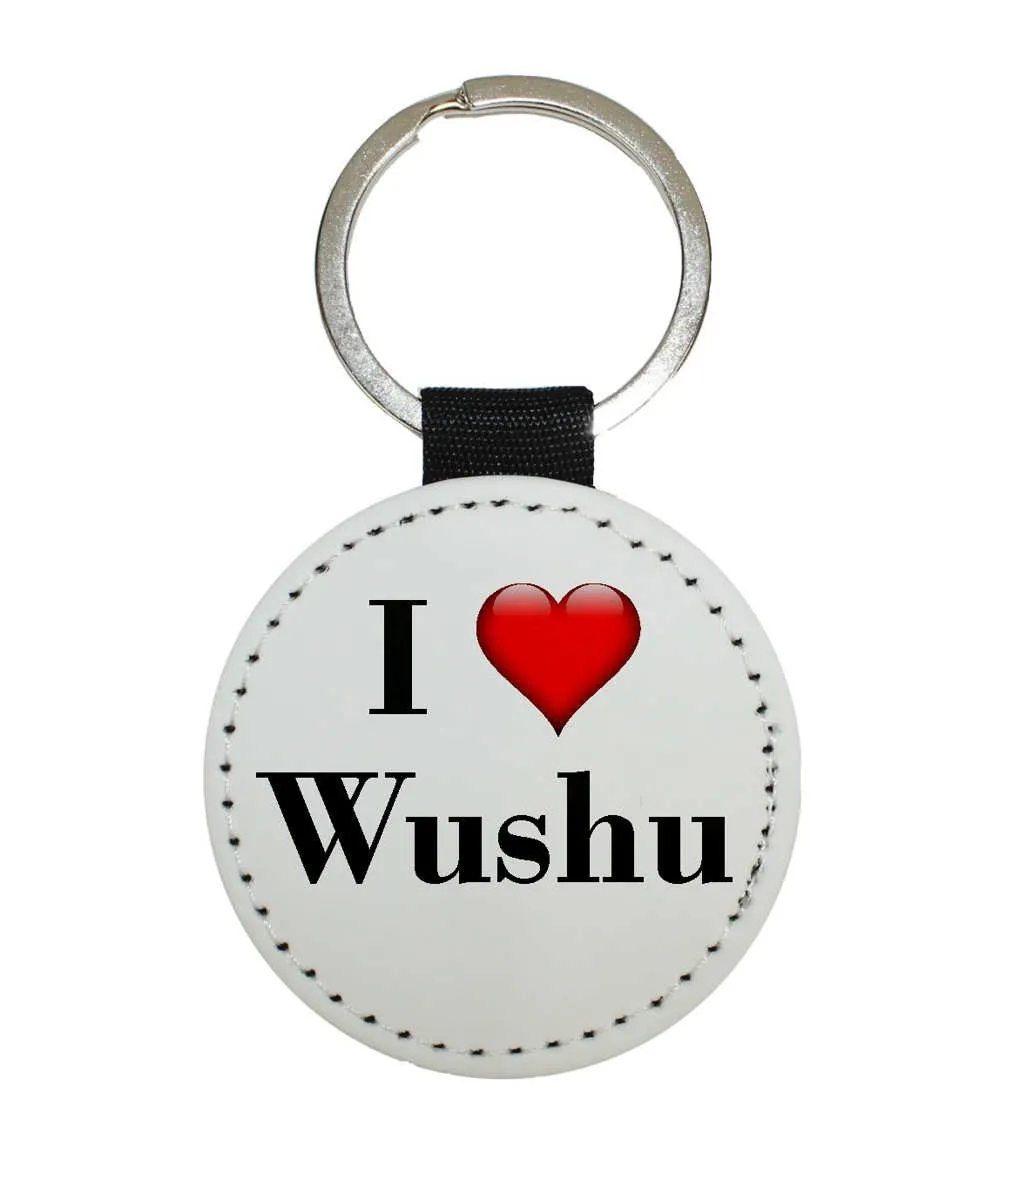 Key rings in different colors motif I Love Wushu